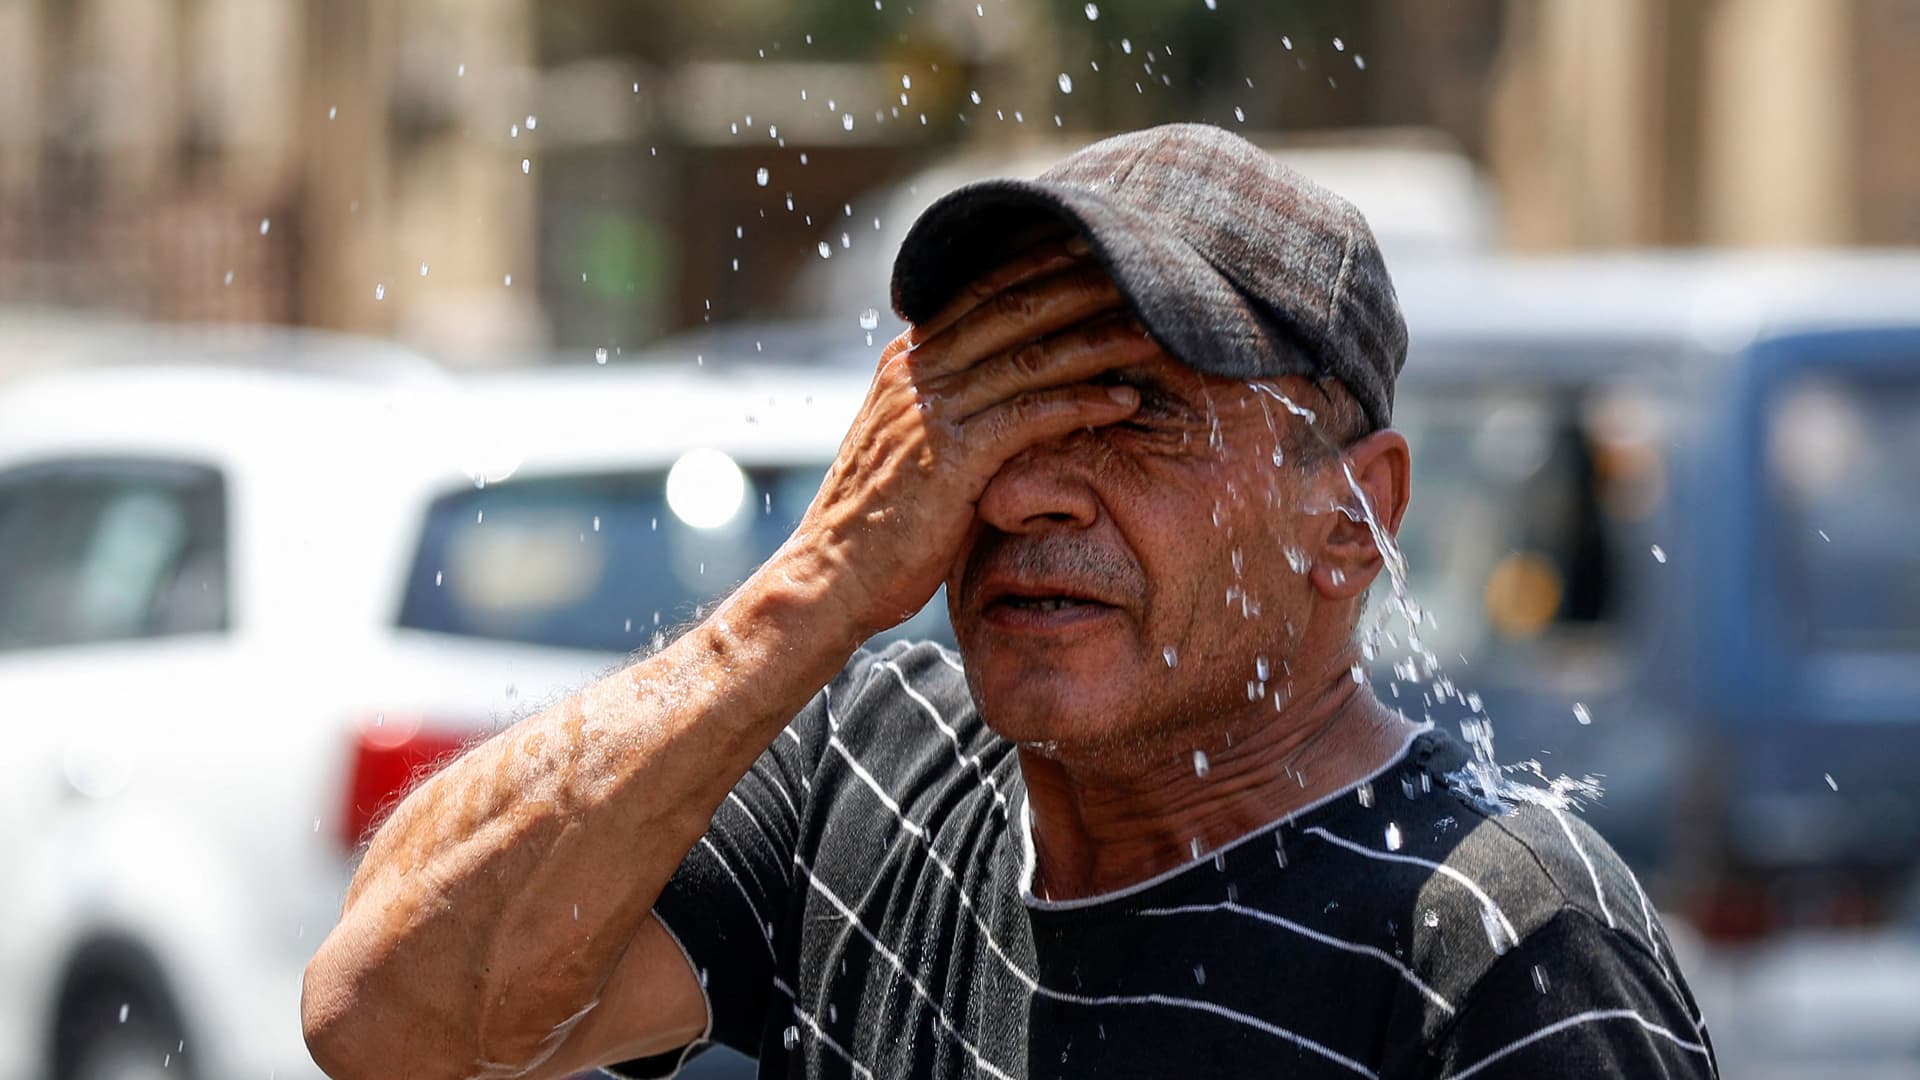 It’s official. UN says the world just endured its hottest summer on record